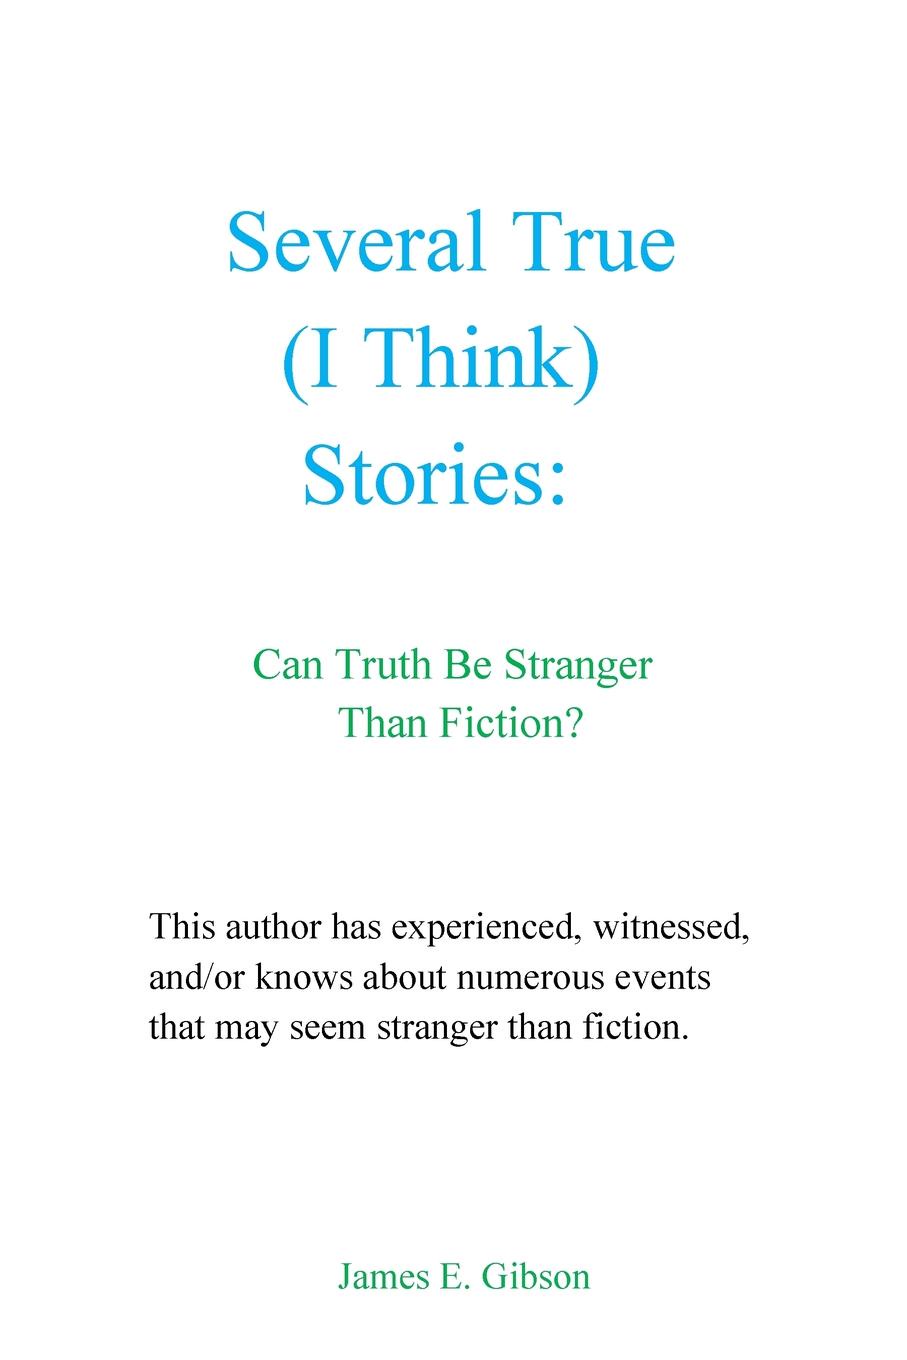 Several True (I Think) Stories. Can Truth Be Stranger Than Fiction.